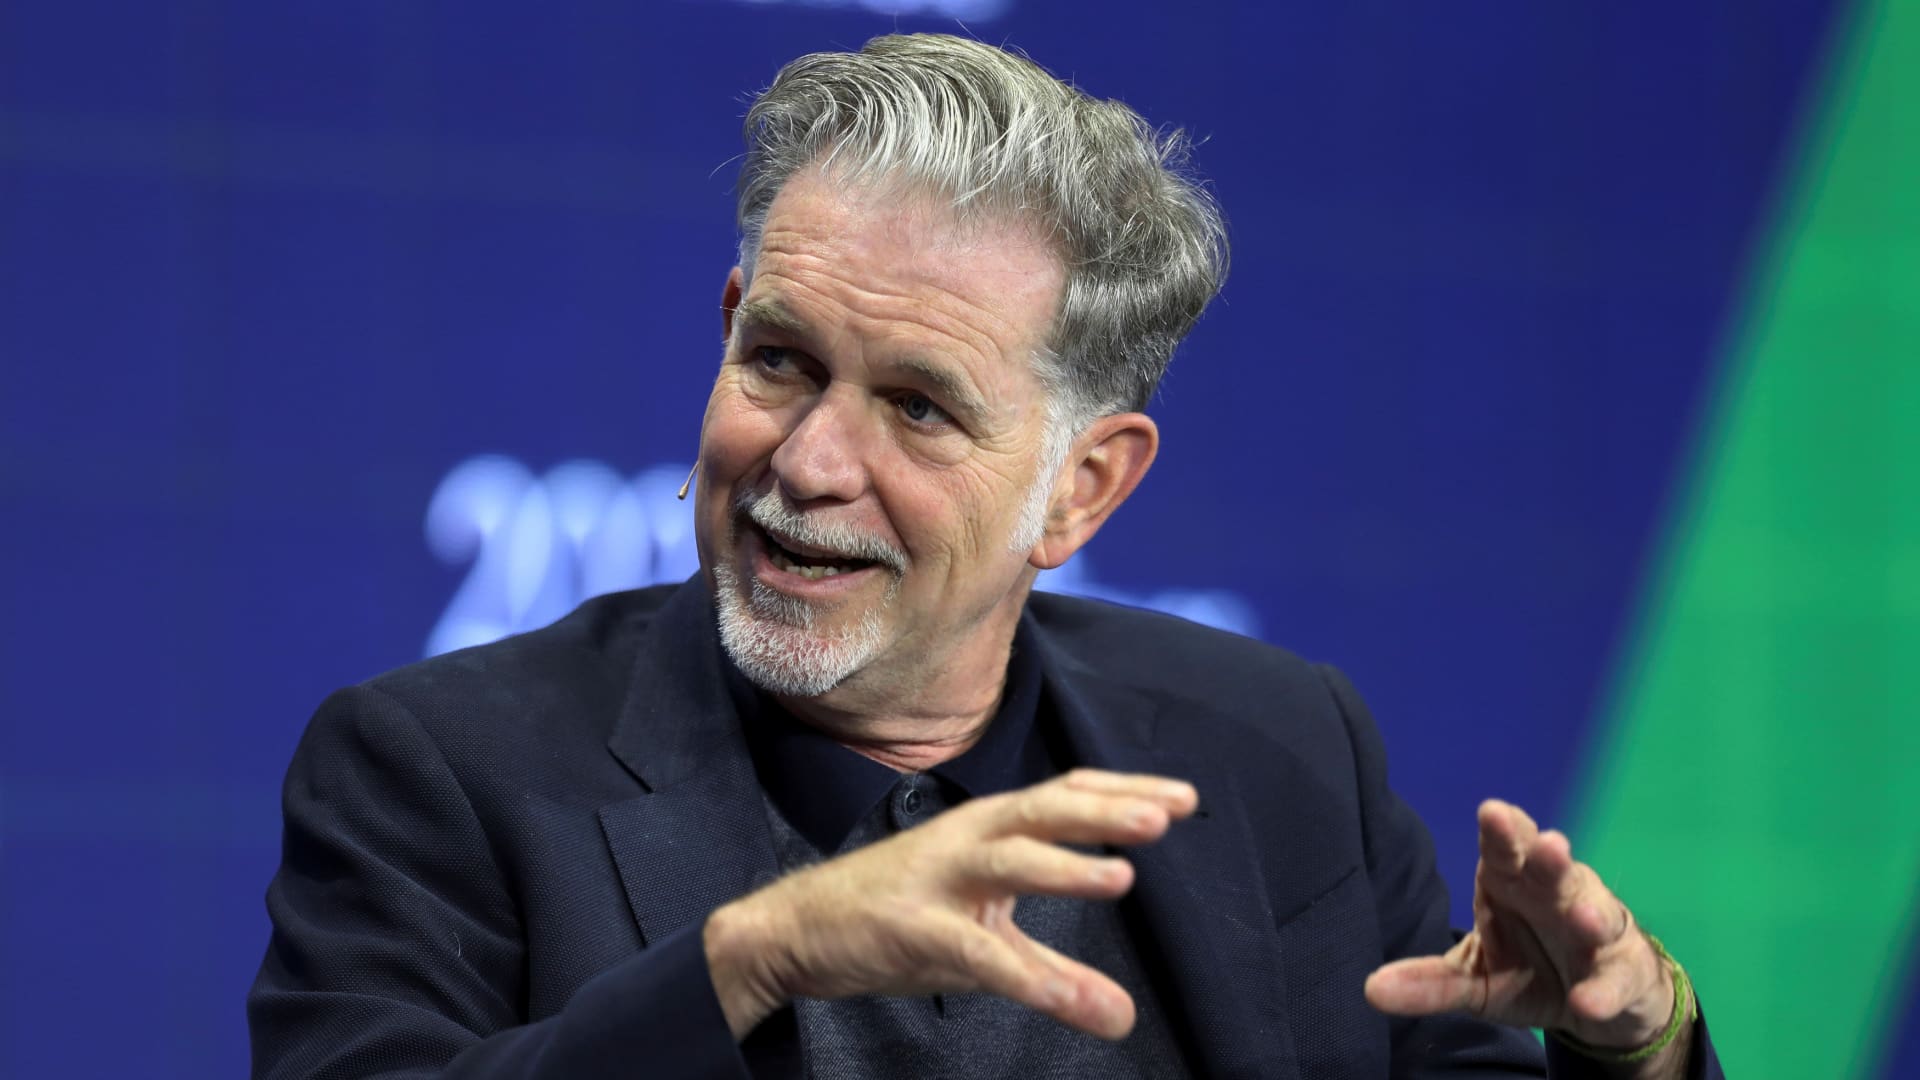 Reed Hastings, Co-CEO, Netflix speaks at the 2021 Milken Institute Global Conference in Beverly Hills, California, U.S. October 18, 2021.